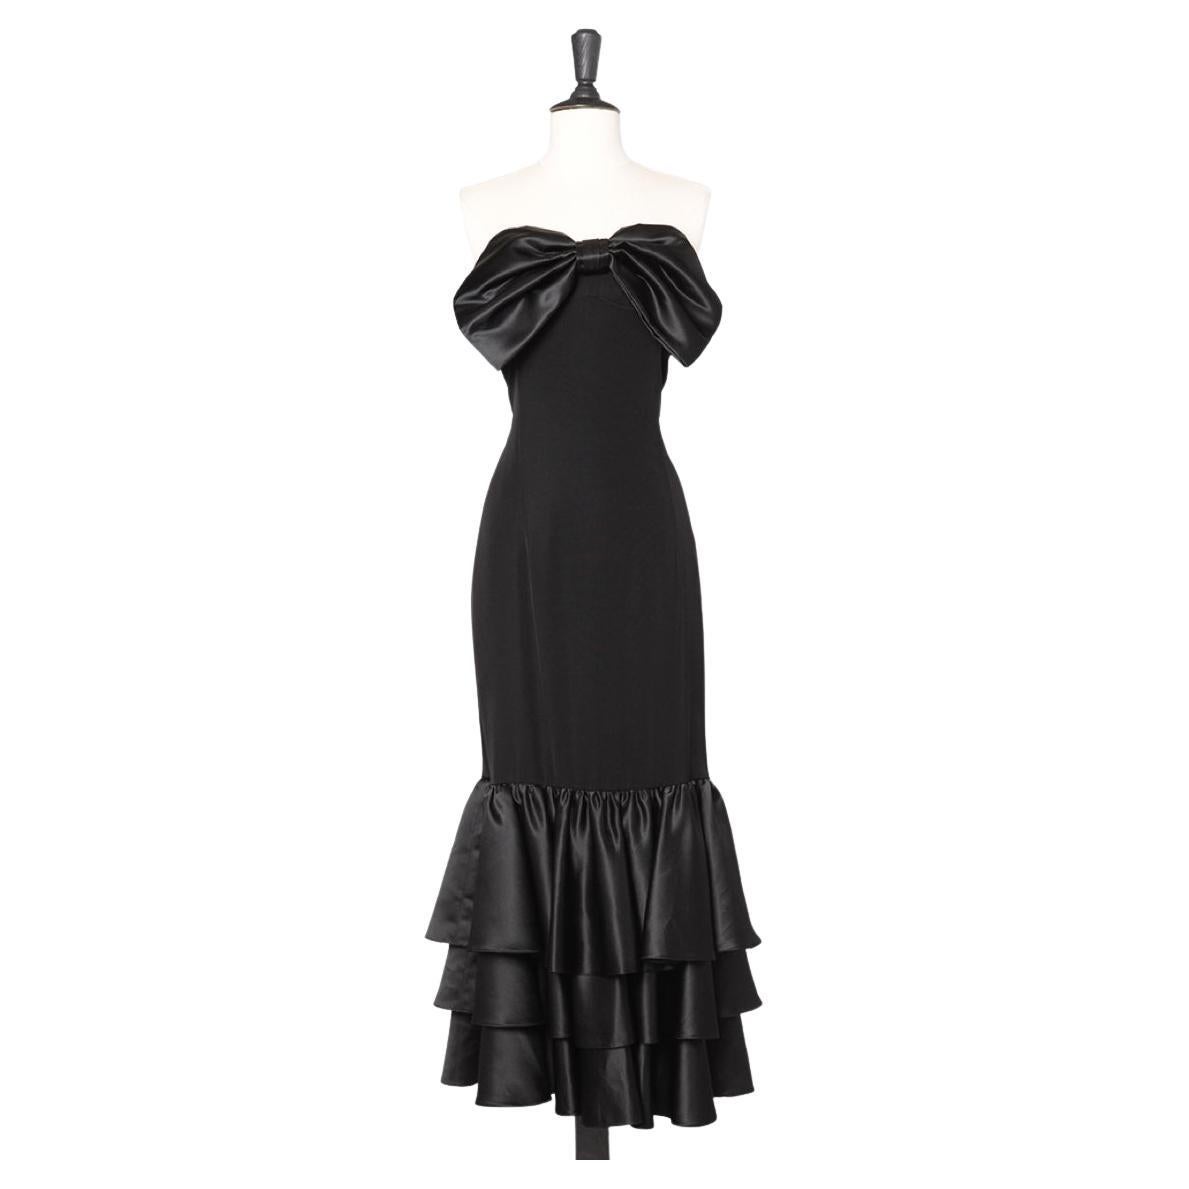 Black evening bustier dress with black satin bow on the bust Louis Féraud 